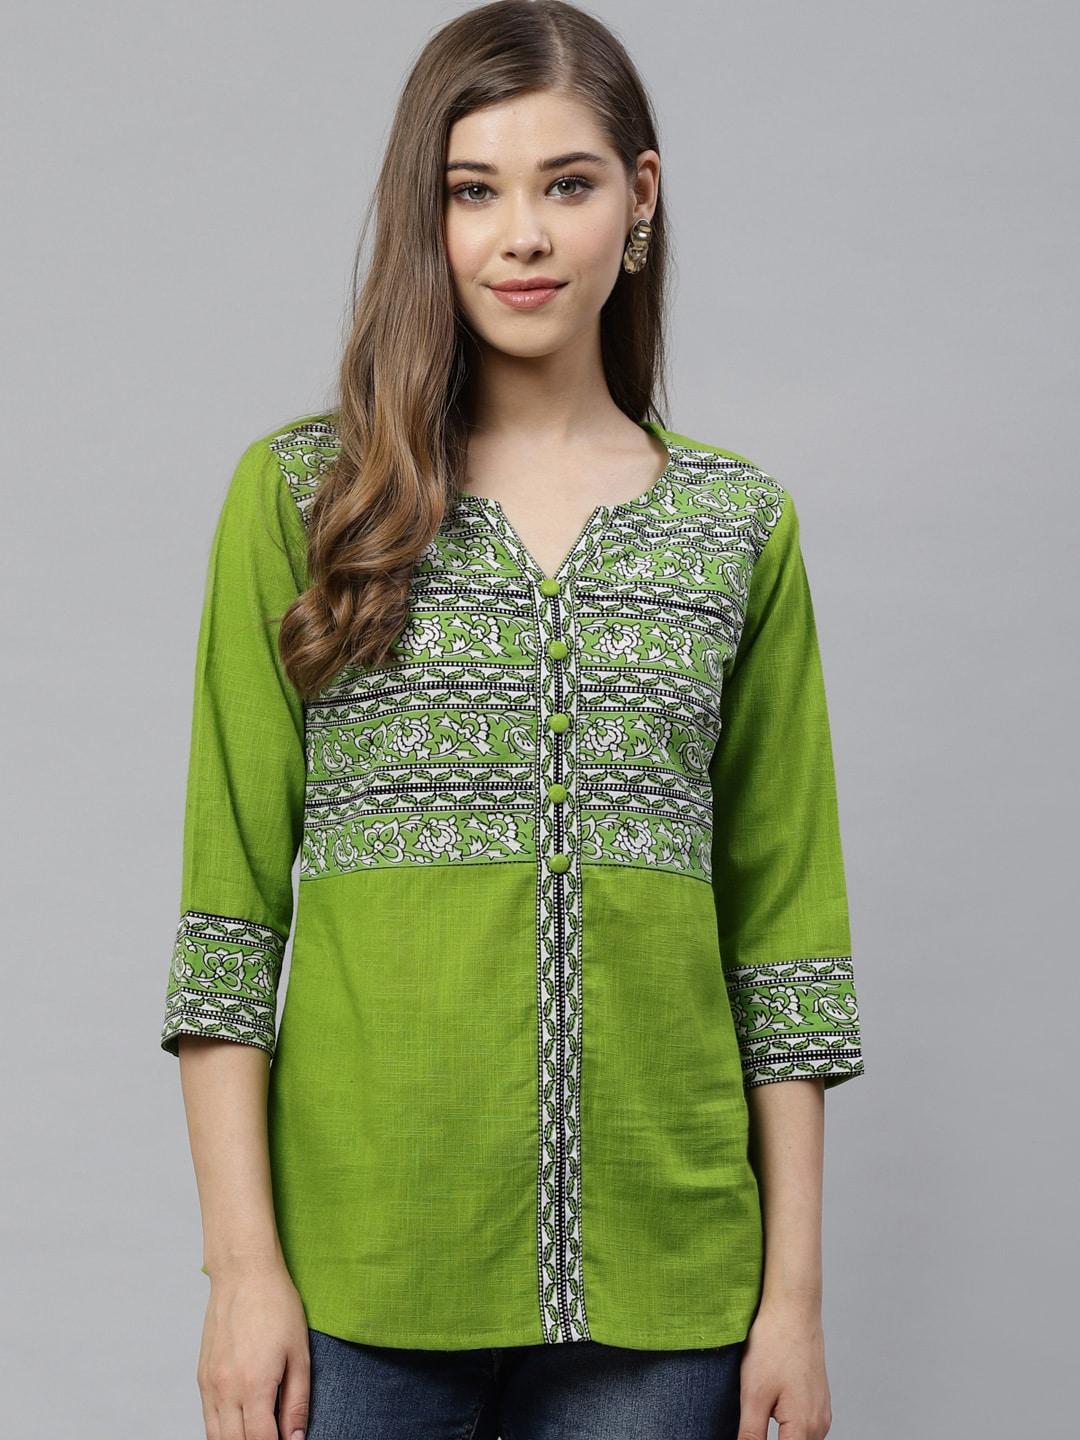 yash-gallery-women-green-&-off-white-printed-top